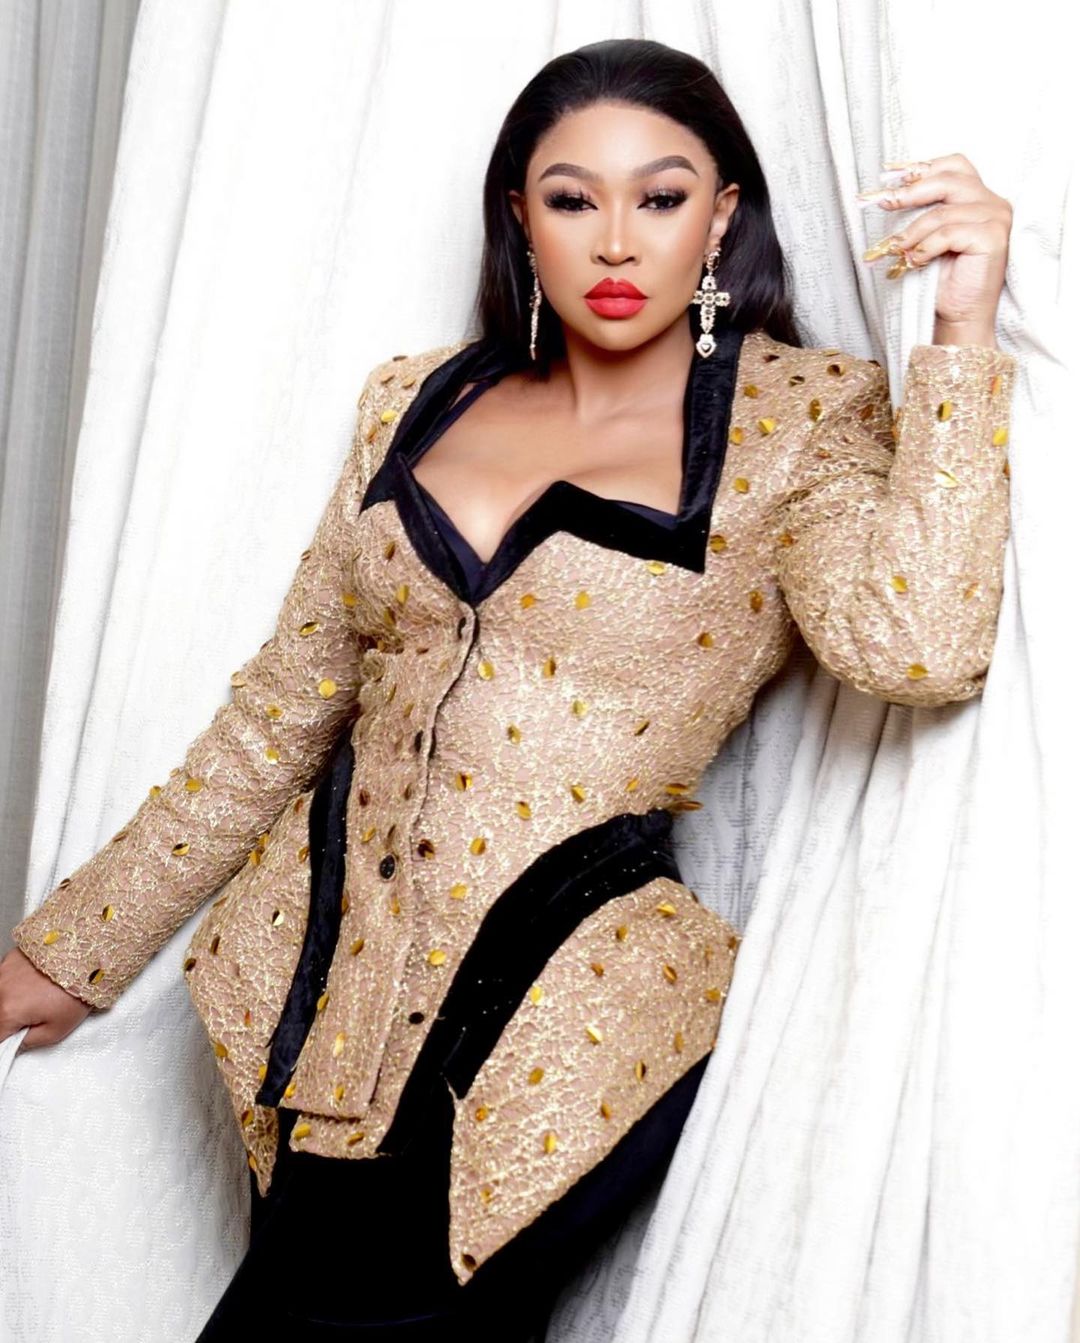 Ayanda Ncwane in trouble with SARS over R2 million